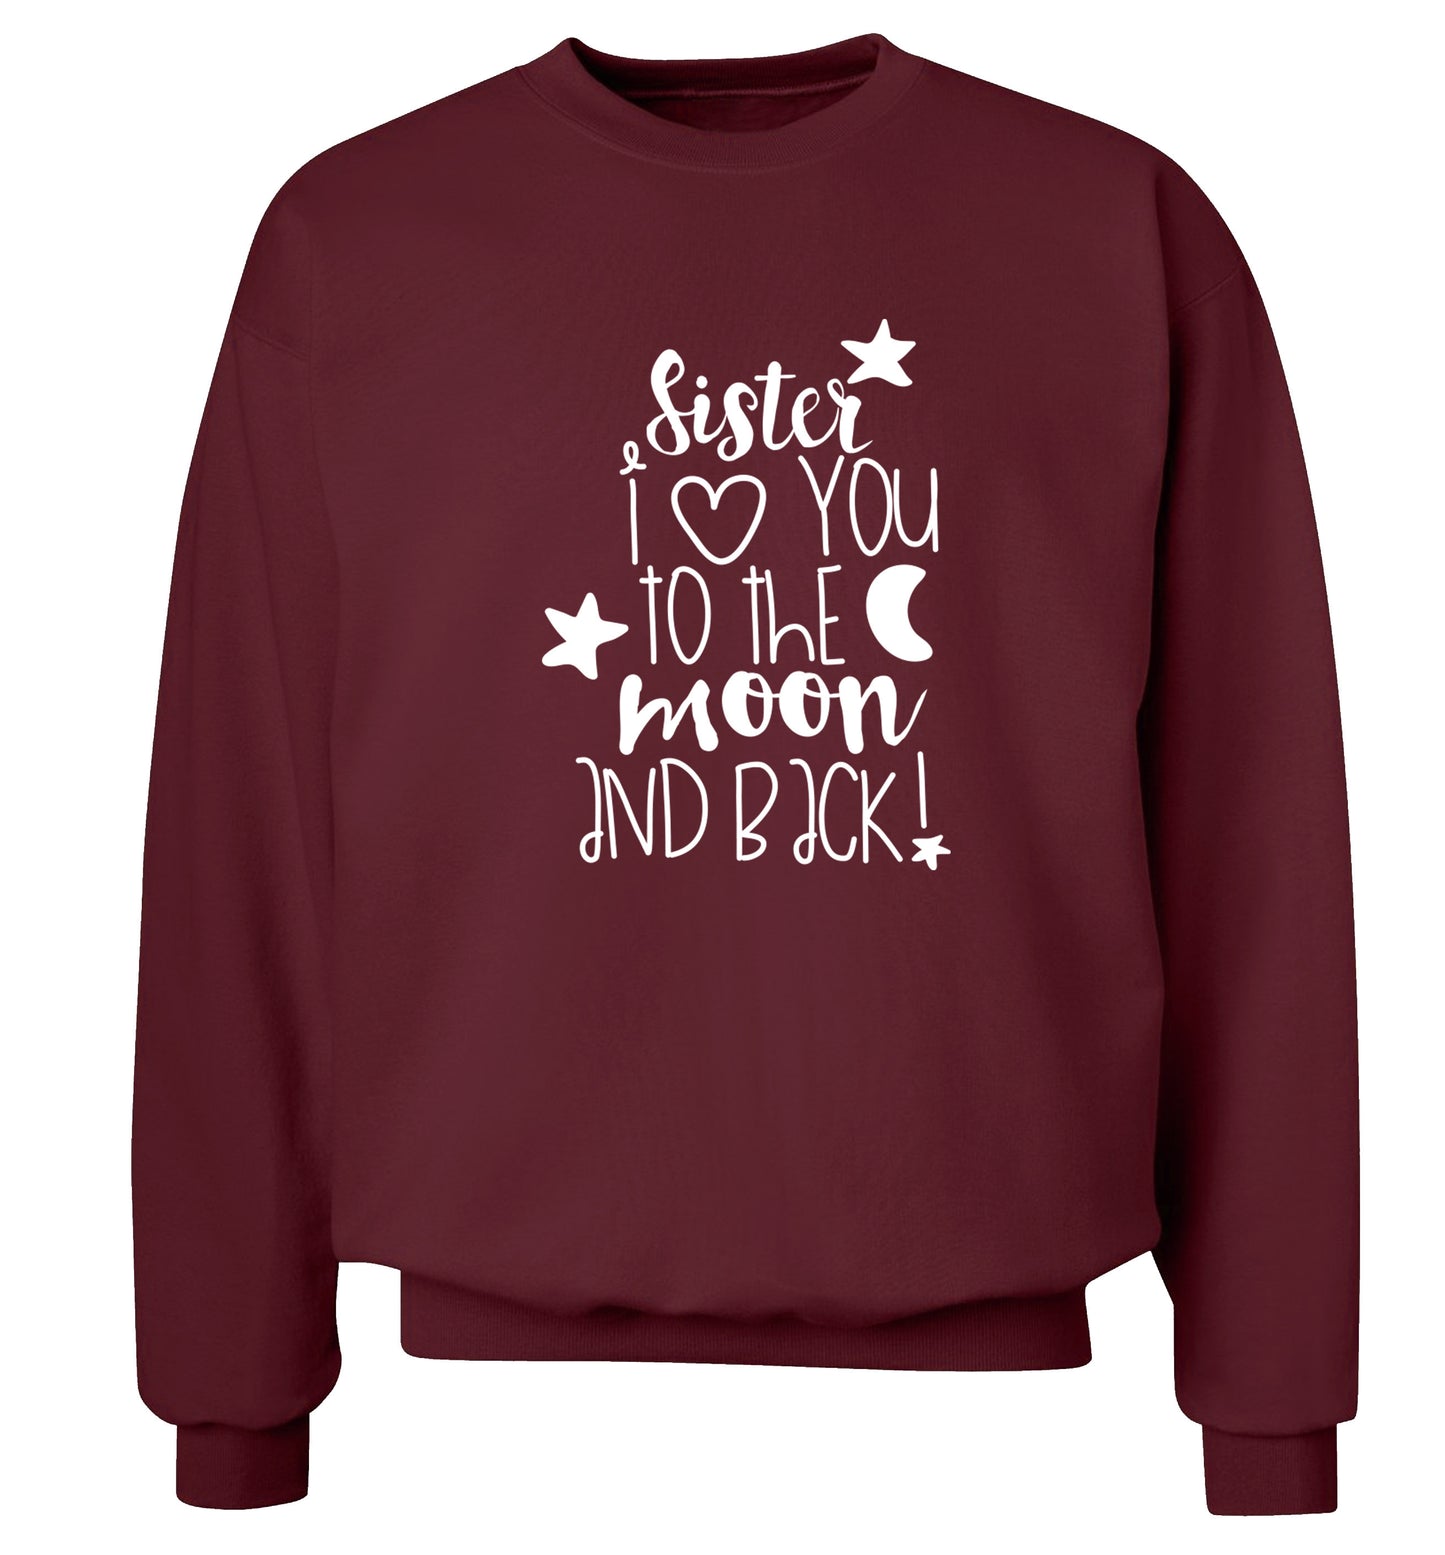 Sister I love you to the moon and back Adult's unisex maroon  sweater 2XL